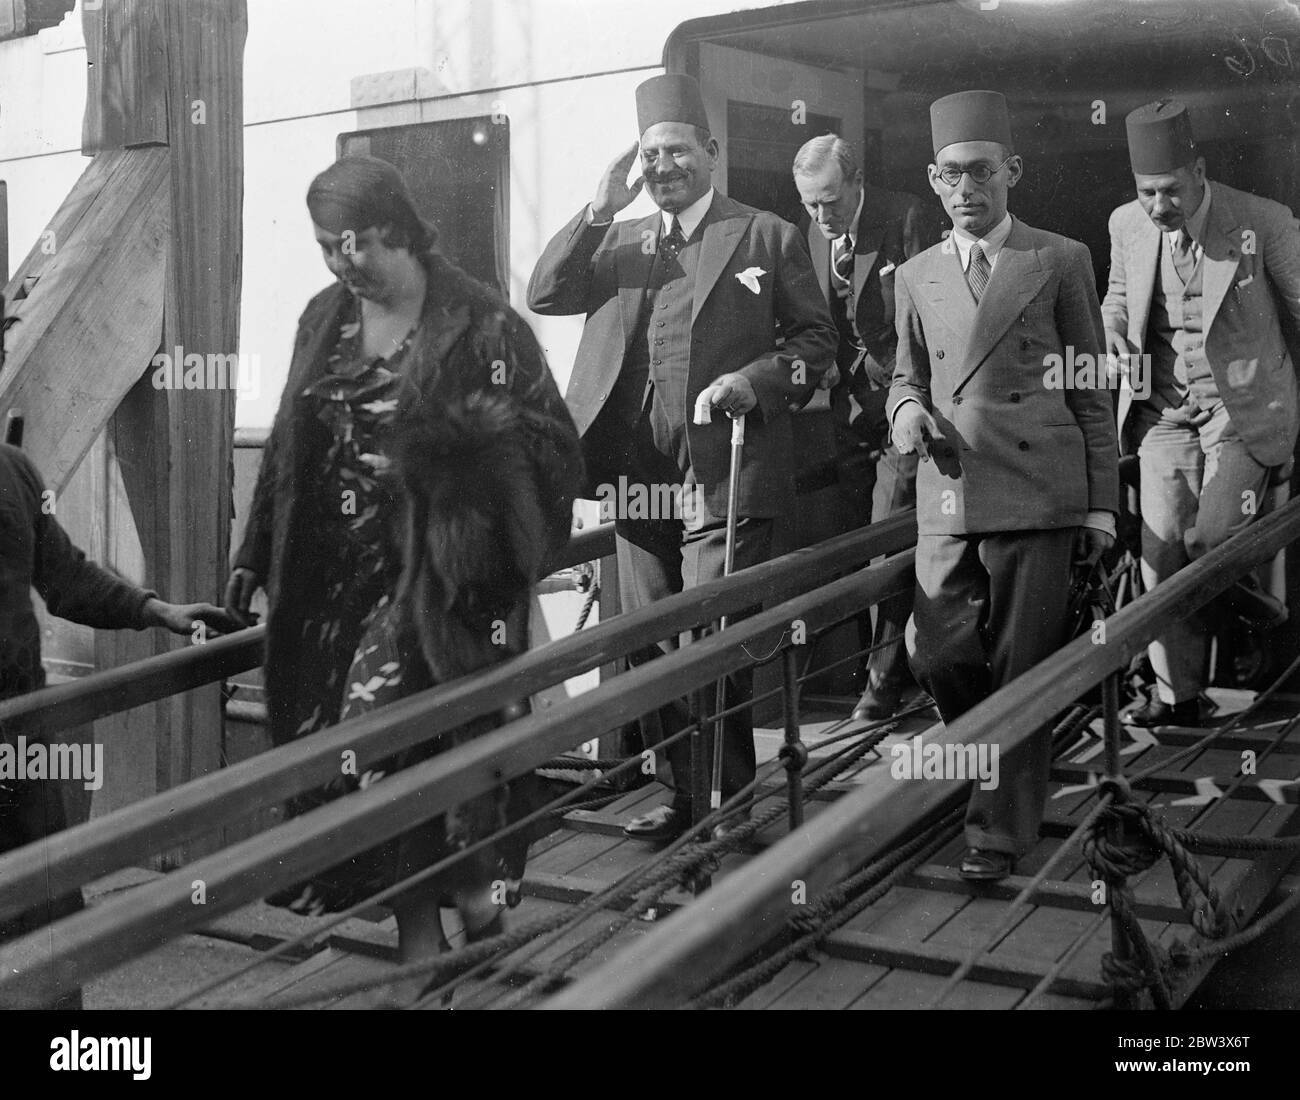 Nahas Pasha and Egyptian delegation arrive at Dover to sign treaty . Led by Wafdist Premier , Nahas Pasha , the Egyptian delegation of 13 which is to take part in the signing of the new Anglo Egyptian Treaty on Wednesday arrived at Dover . The delgation was recieved by Major E N S Crankshaw on behalf of the Minister in Charge of Government Hospitality . Photo shows , Nahas Pasha saluting as he went ashore at Dover preceded by his wife . 23 August 1936 Original caption from negative Stock Photo